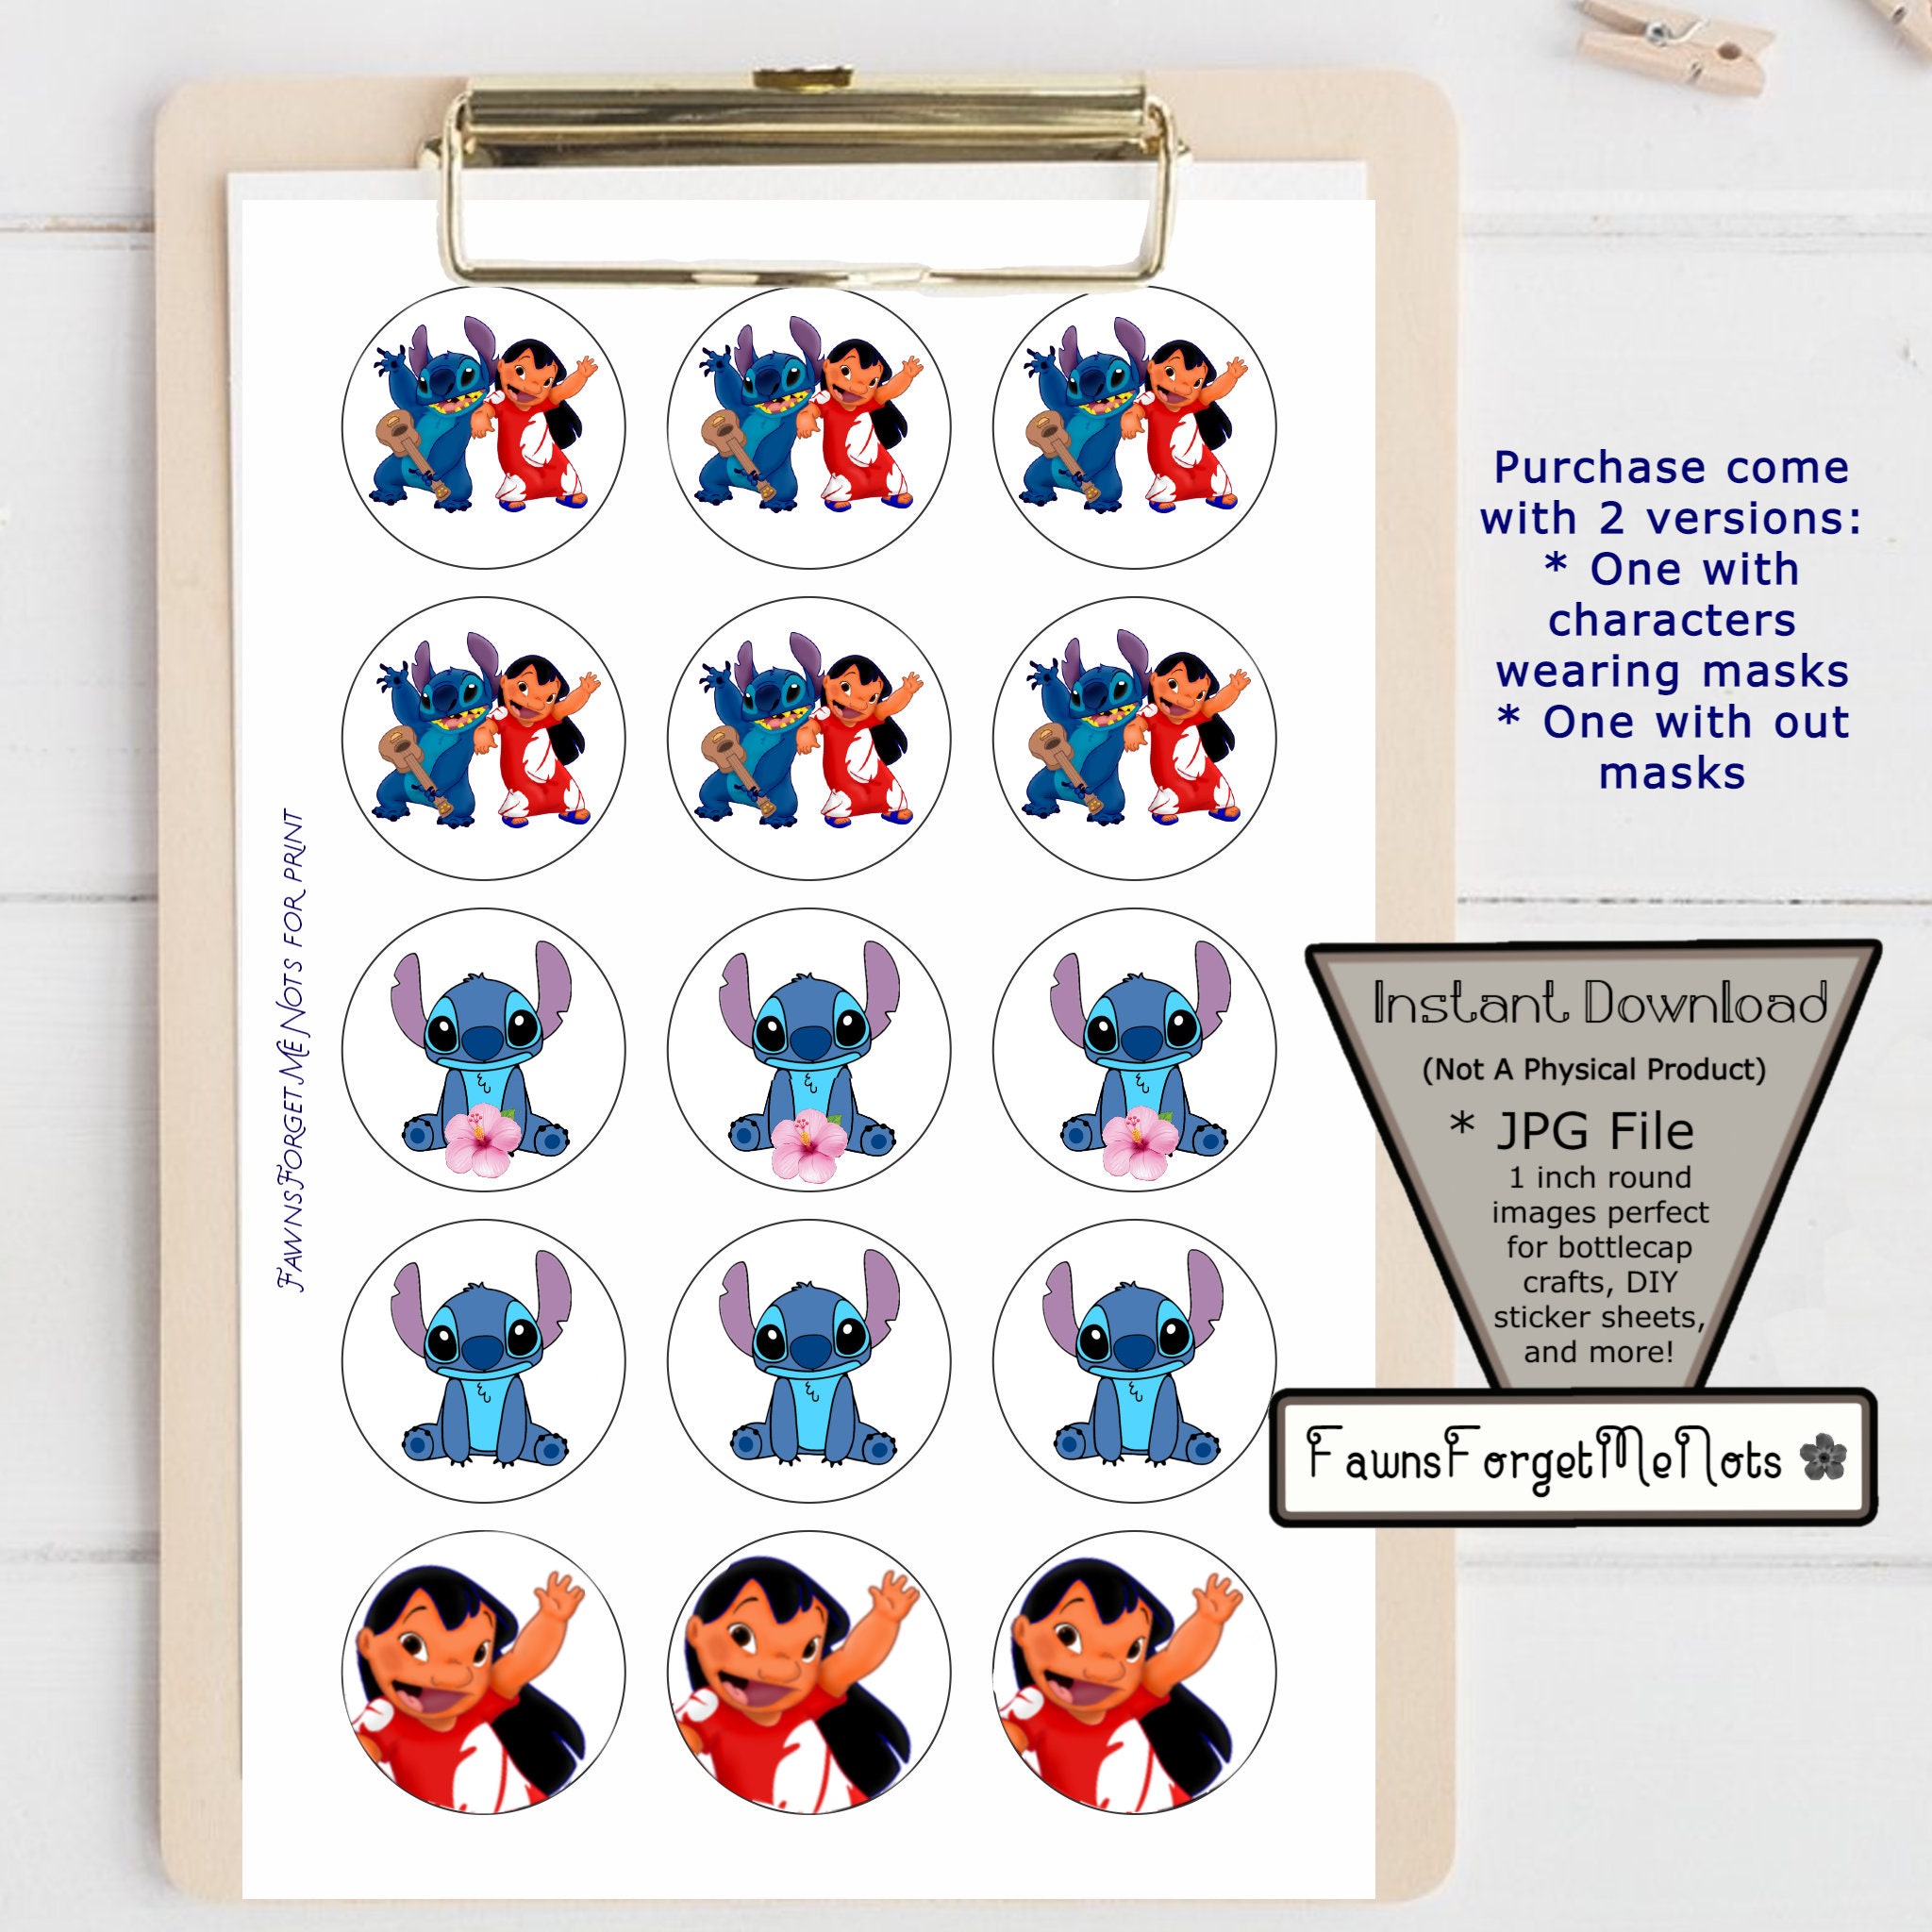 Inspired Stitch Disney Themed Pack of 8 Stickers, Lilo & Stitch Themed  Sticker Pack, Adorable/funny Stitch Inspired Sticker Pack Great Gift 